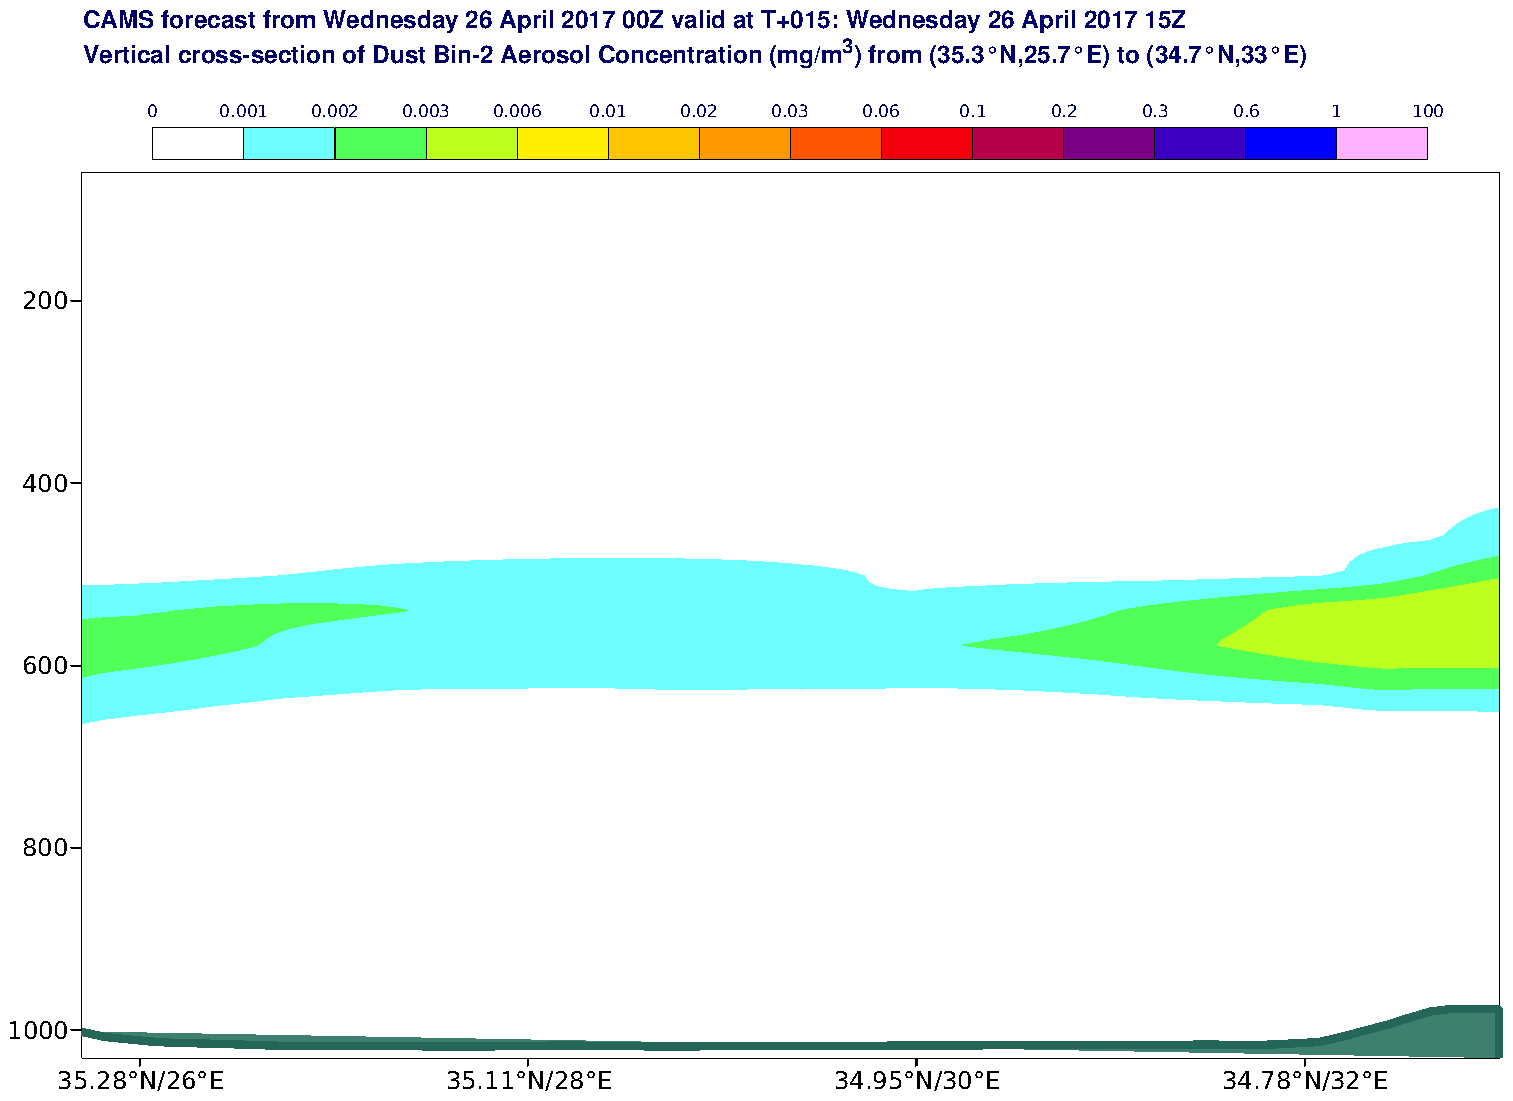 Vertical cross-section of Dust Bin-2 Aerosol Concentration (mg/m3) valid at T15 - 2017-04-26 15:00